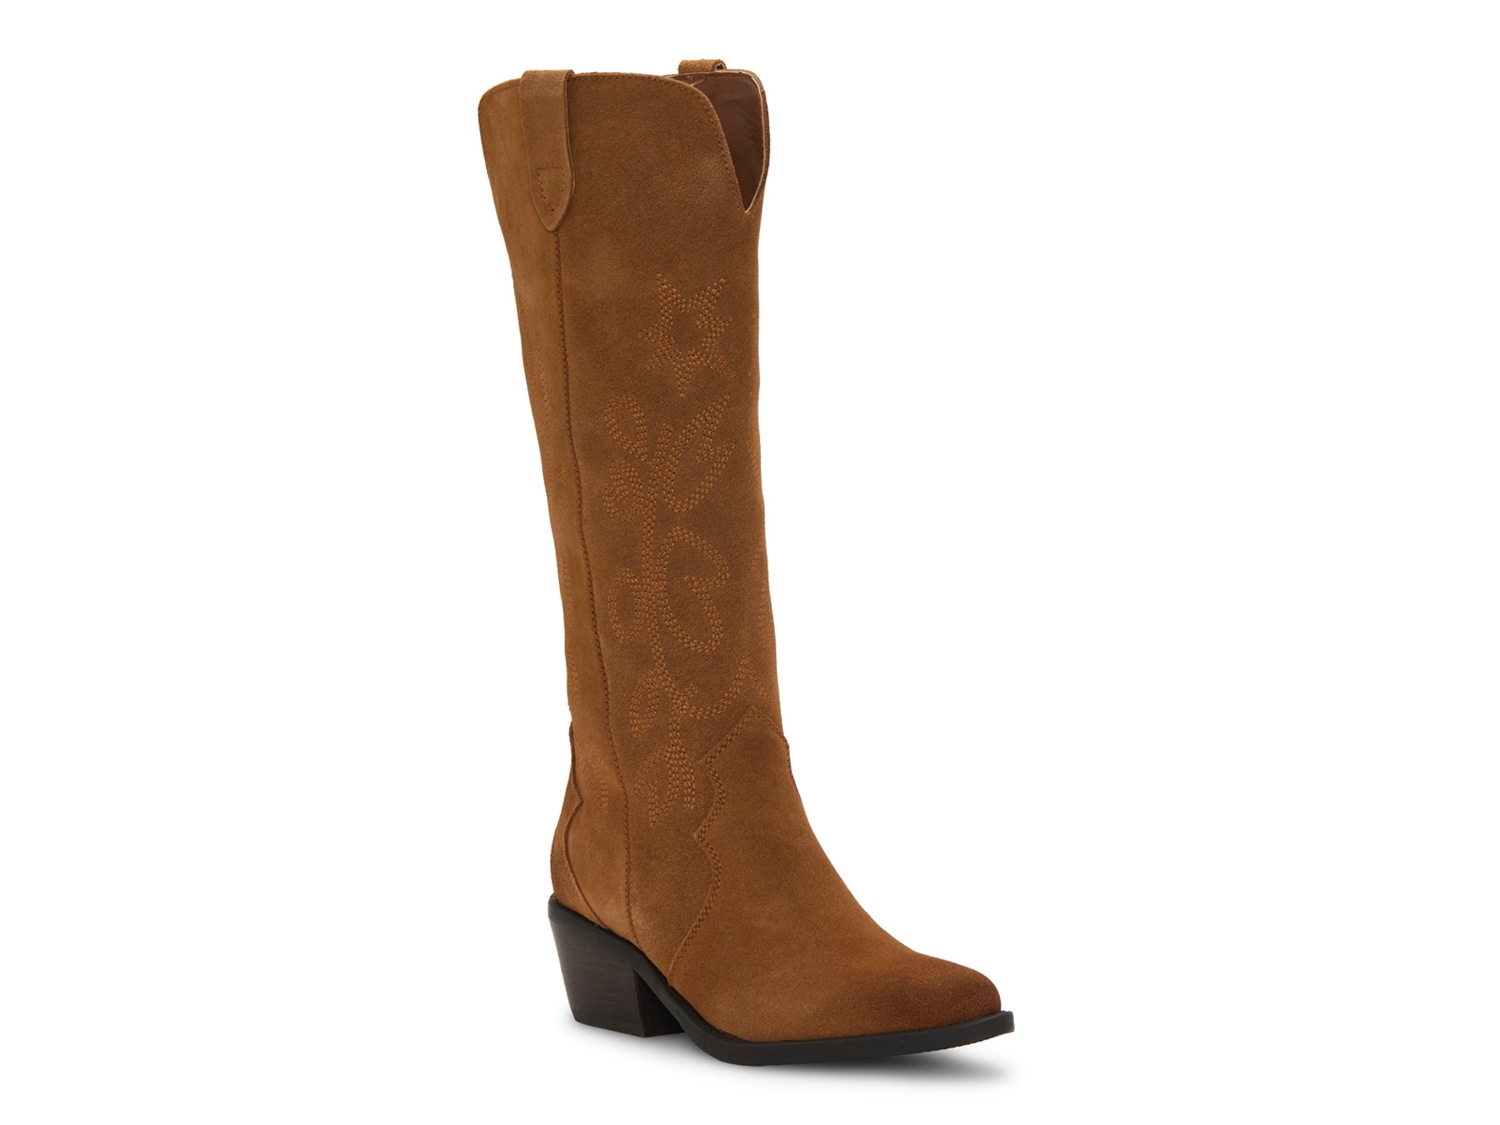 Vince Camuto Sasienda Boot - Free Shipping | DSW